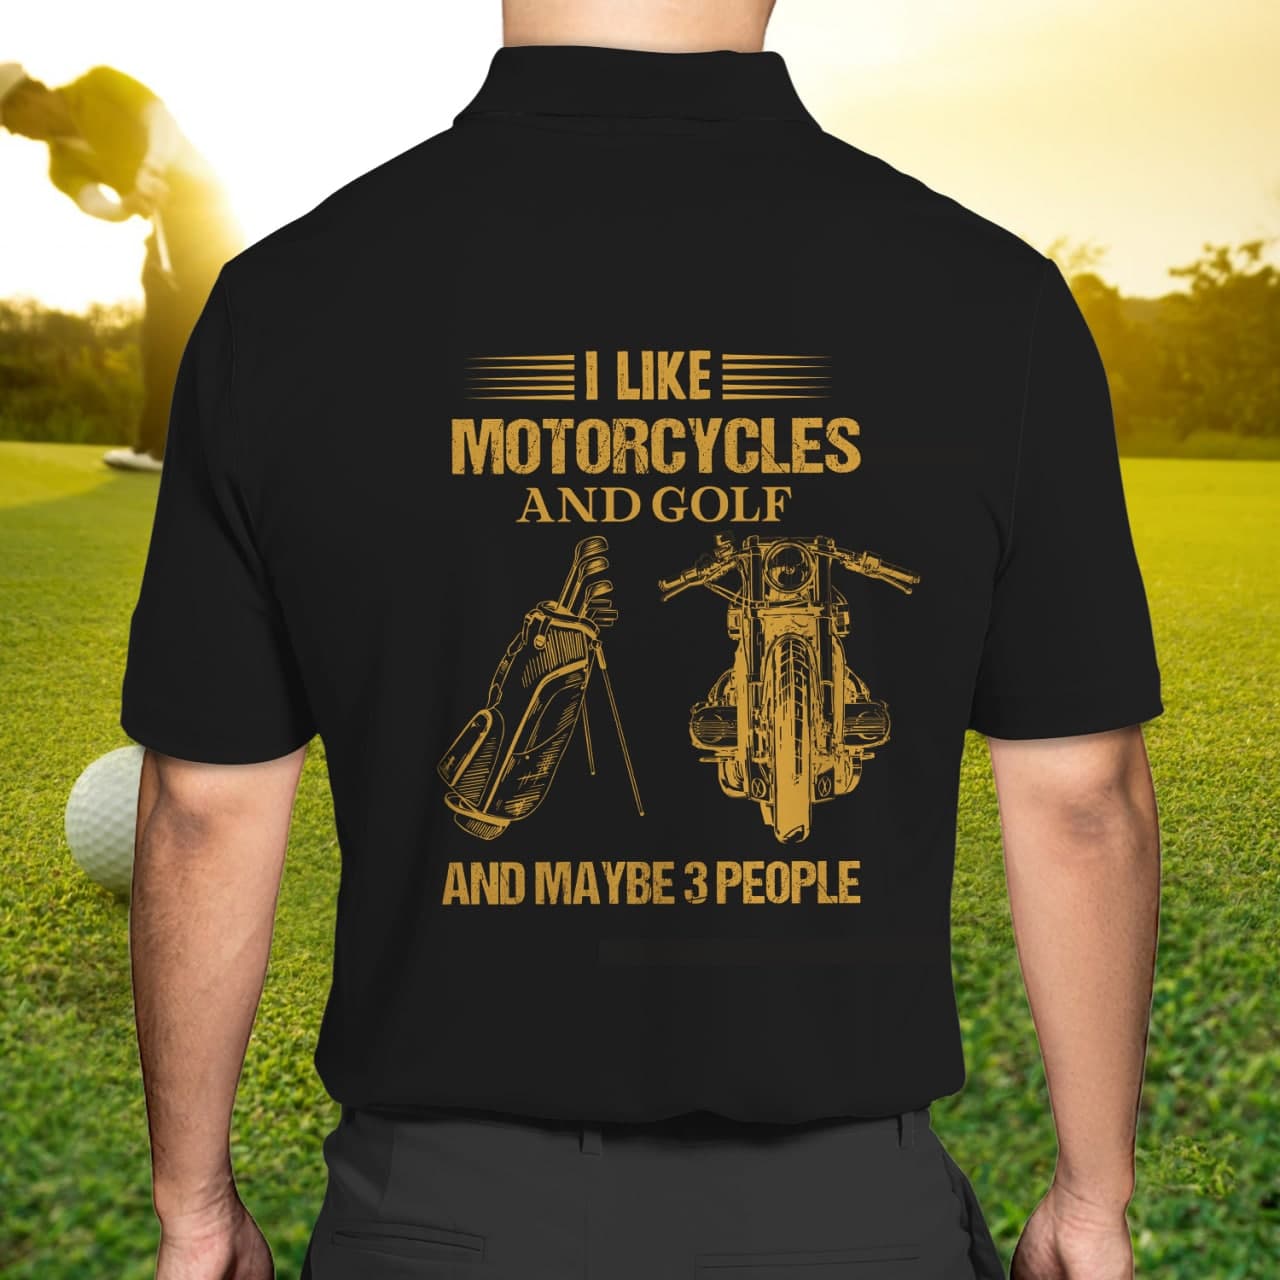 Motorcycles and golf- Personalized Name 3D Polo Shirt - Hdmt